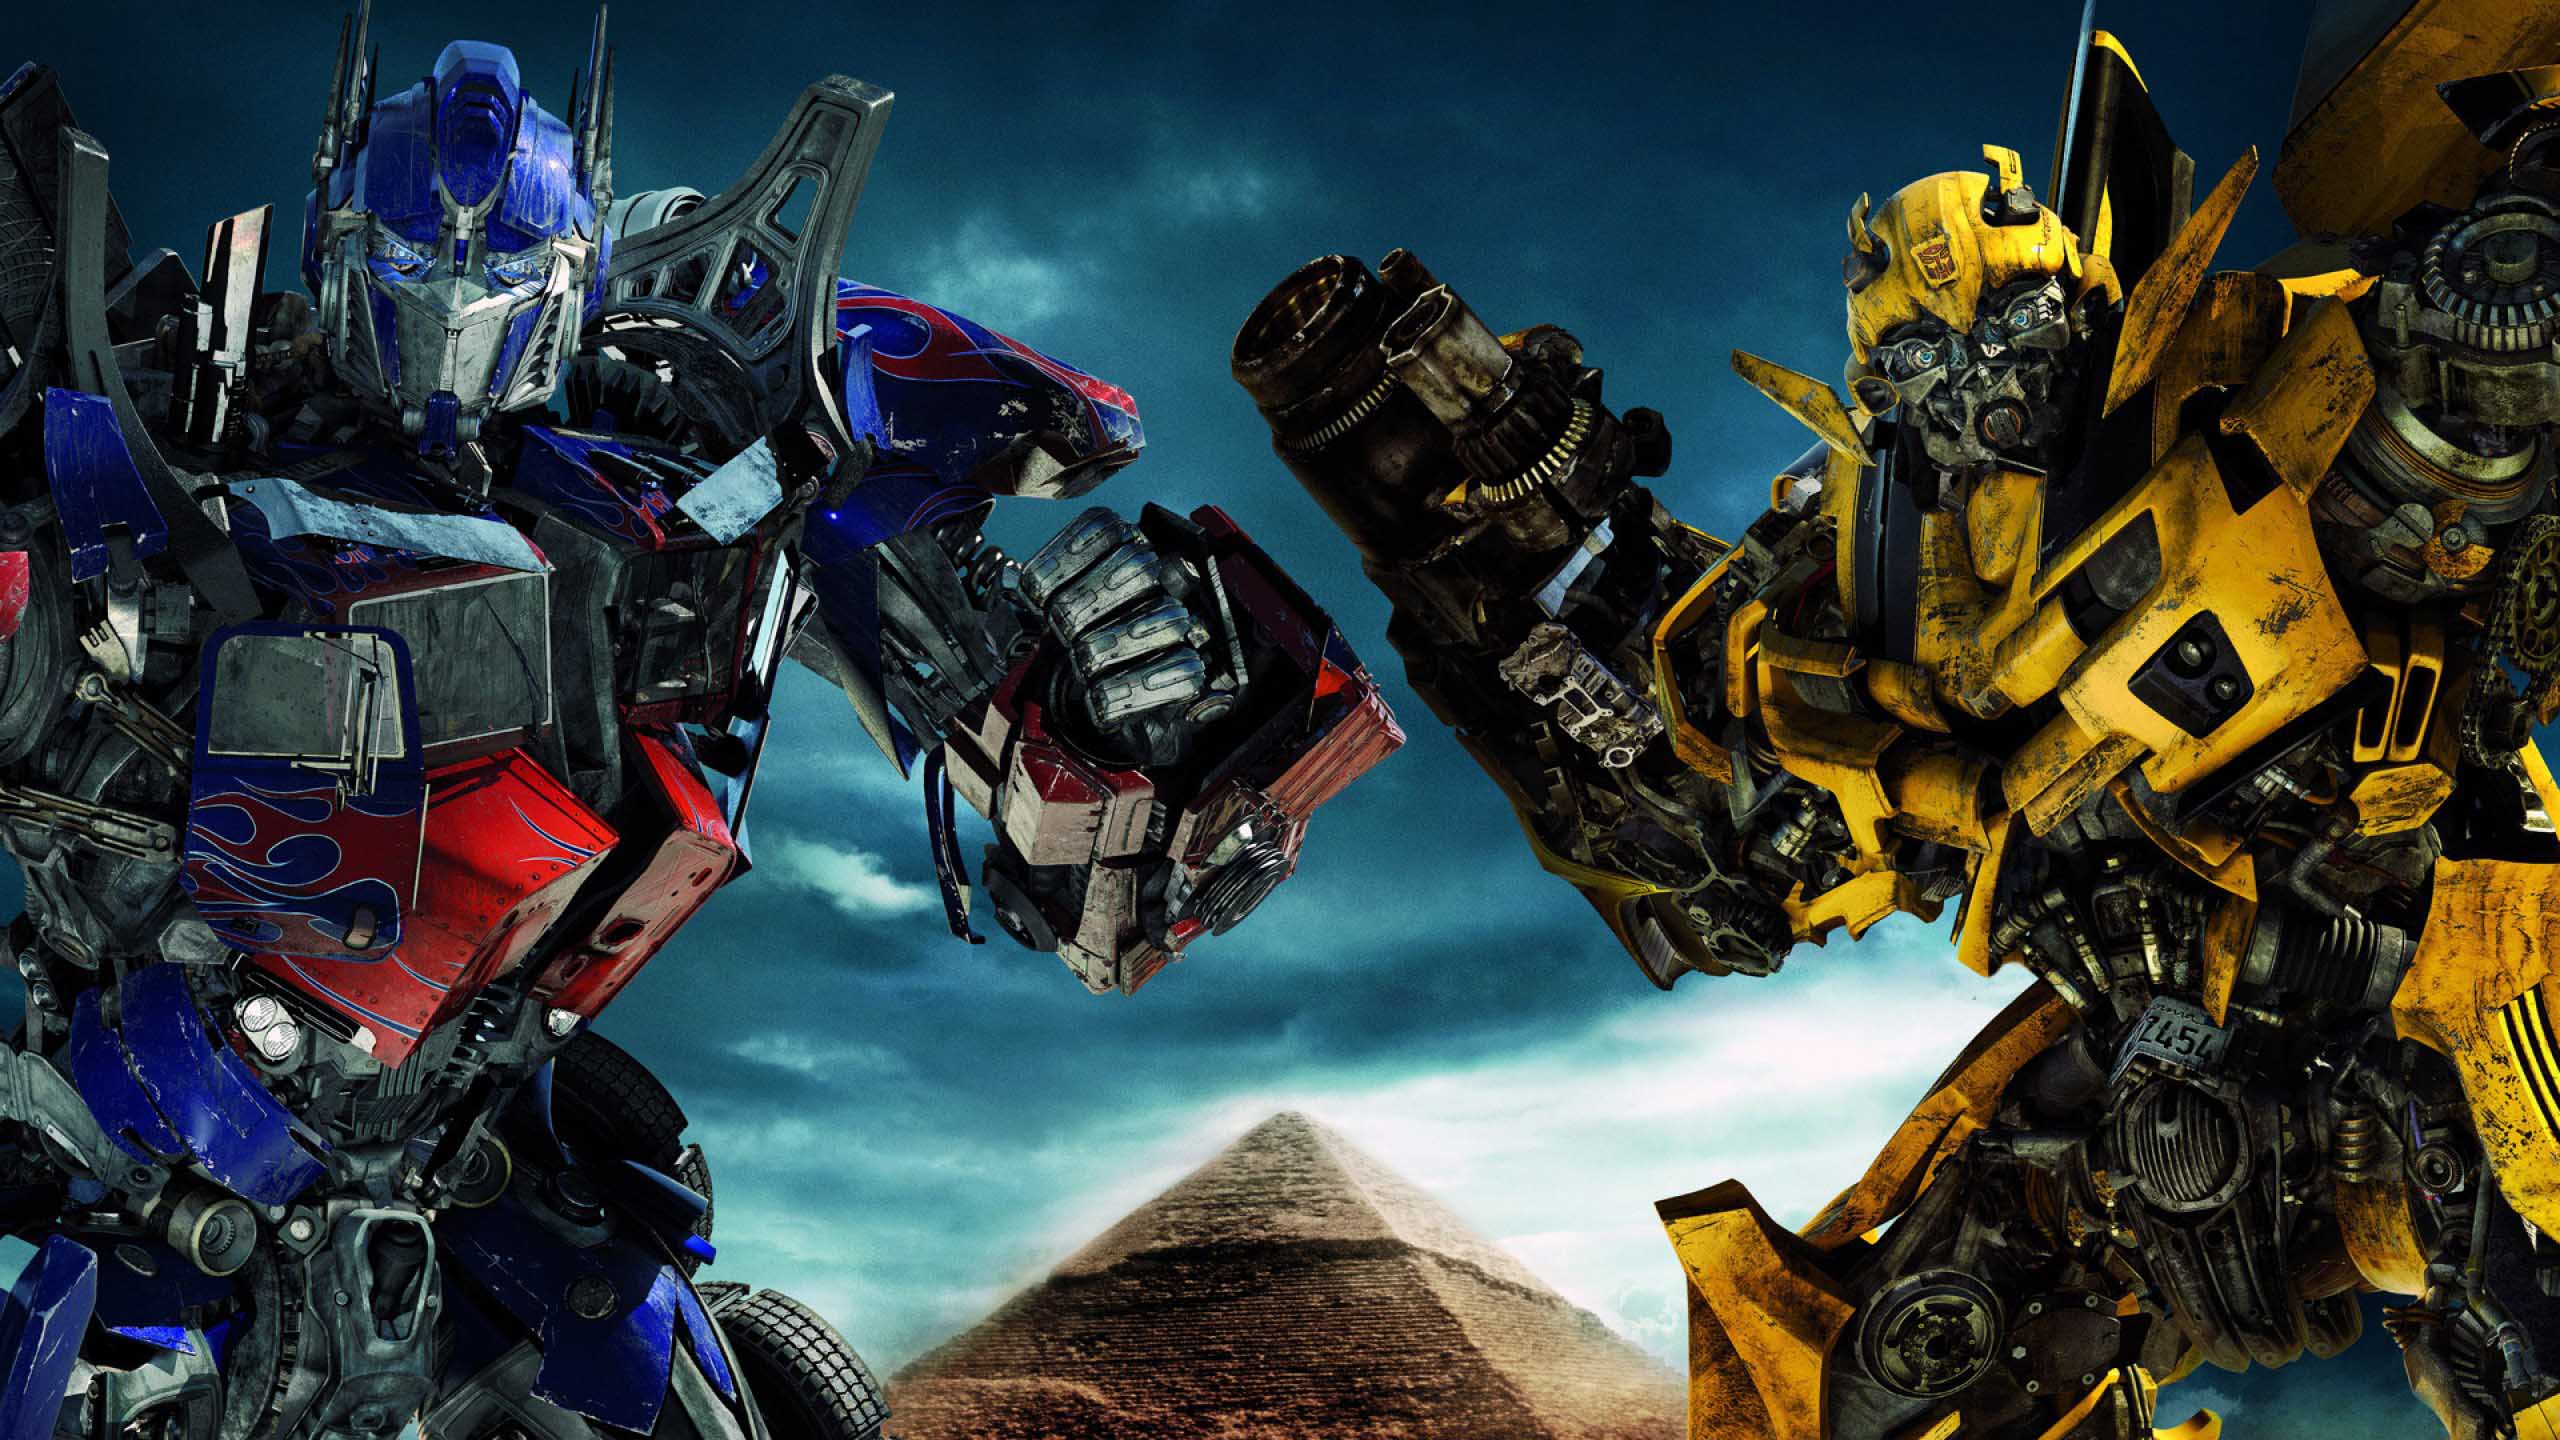 Optimus Prime And Bumblebee, transformers, movie, cybertron